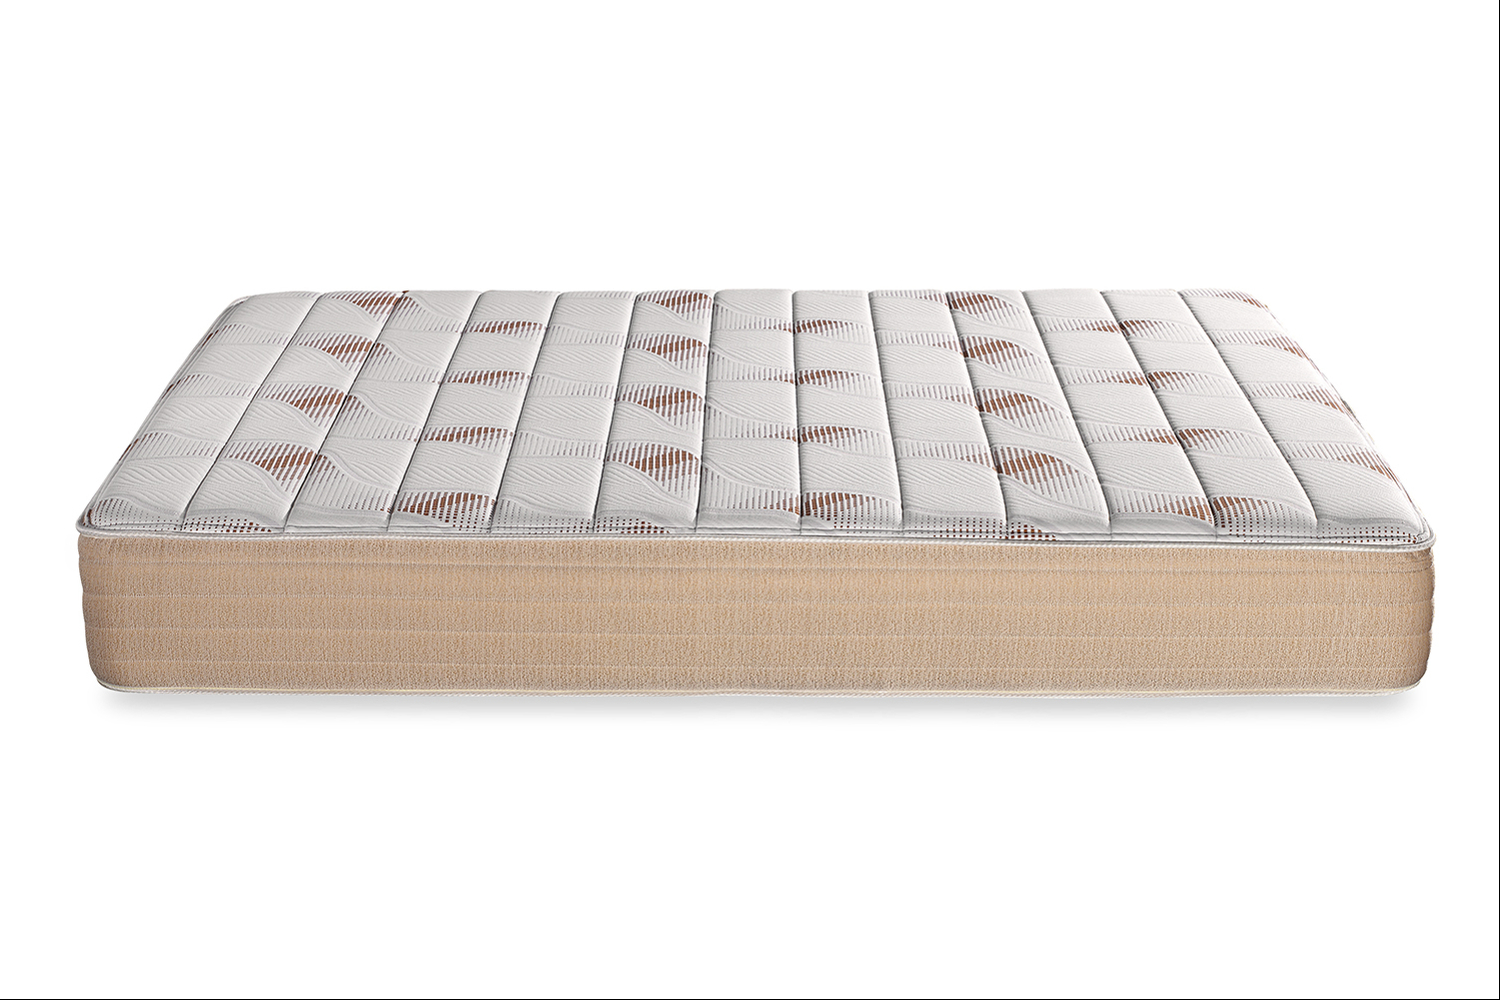 copper infused mattress benefits peer reviewed